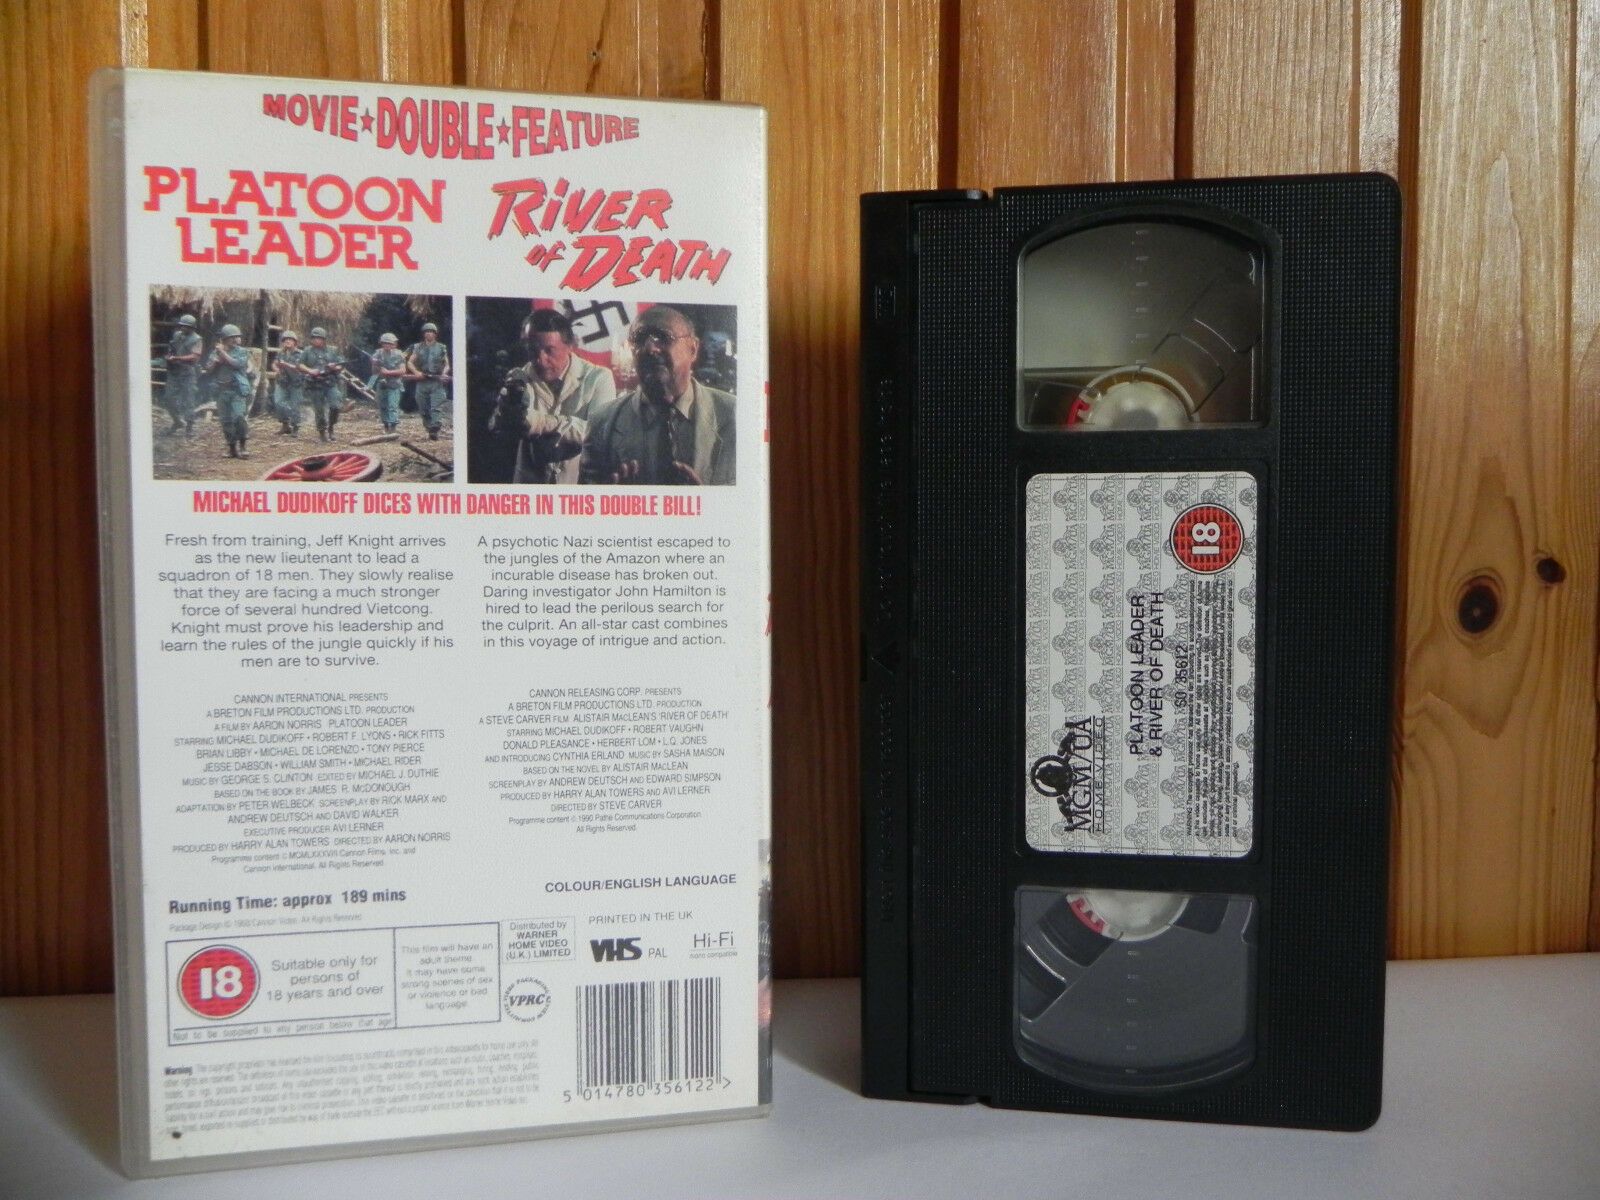 Platoon Leader/River Of Death - Cannon - Action - Michael Dudikoff - Pal VHS-